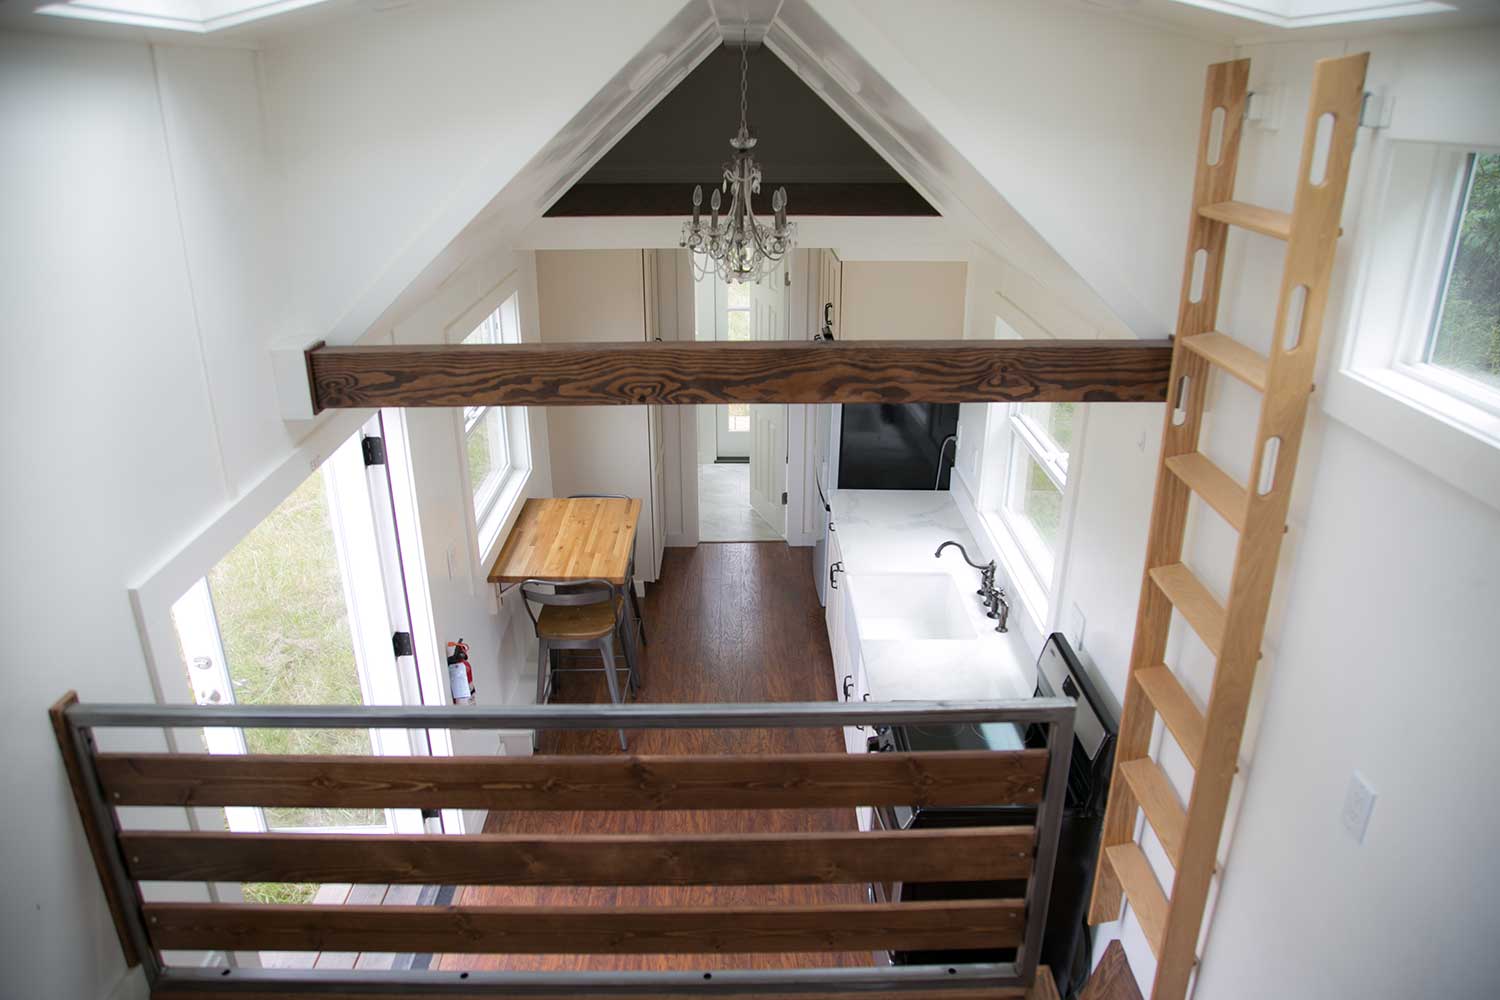 View down from the loft of the Maribelle Blue custom tiny home